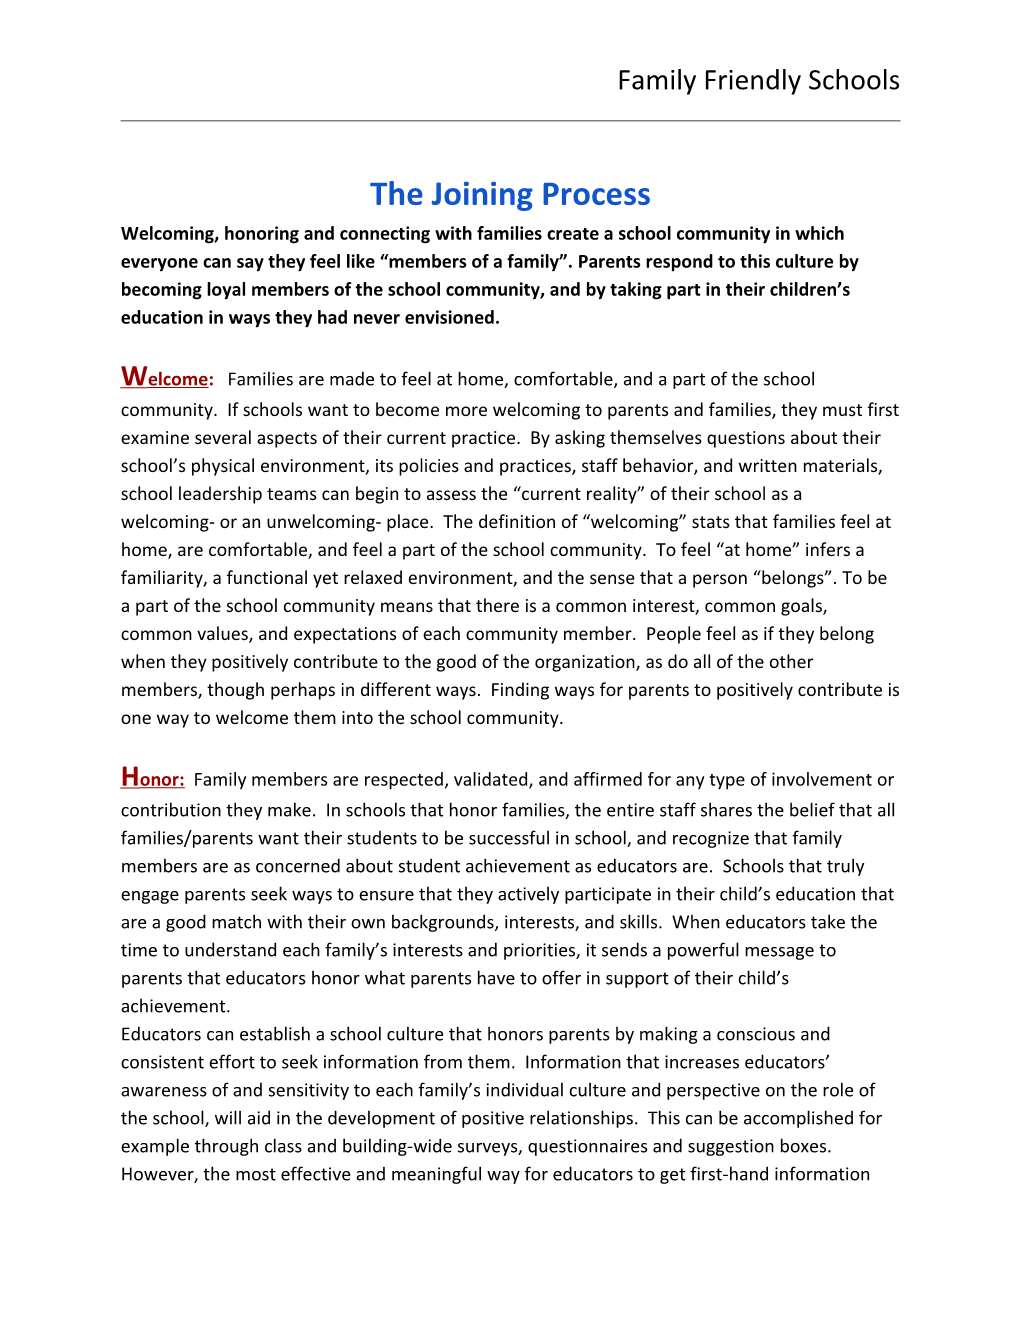 The Joining Process